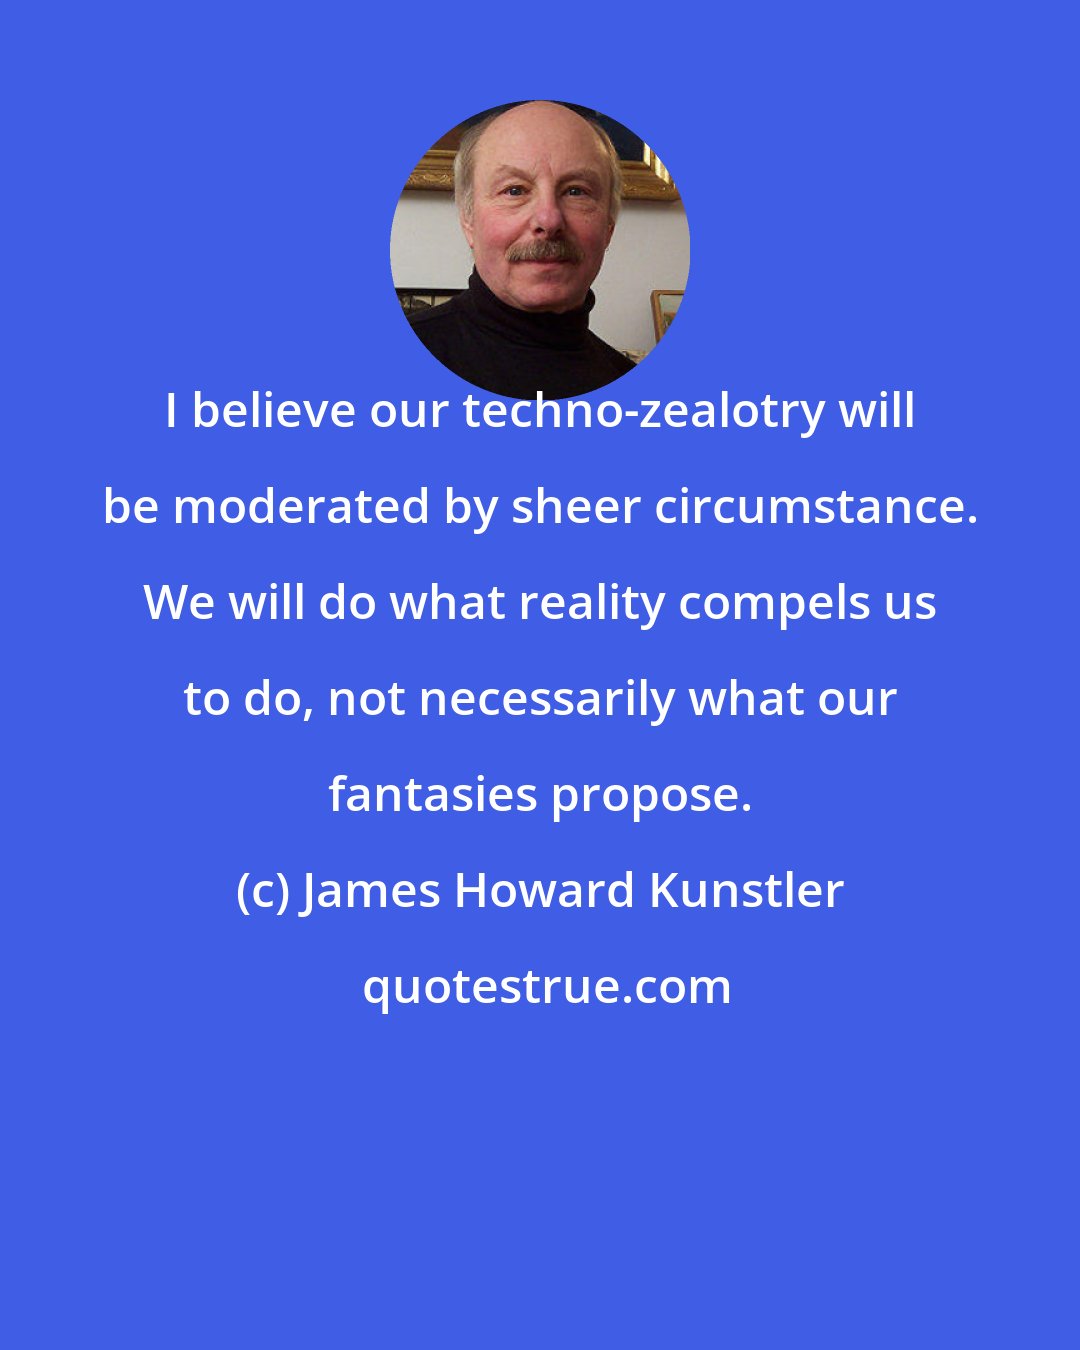 James Howard Kunstler: I believe our techno-zealotry will be moderated by sheer circumstance. We will do what reality compels us to do, not necessarily what our fantasies propose.